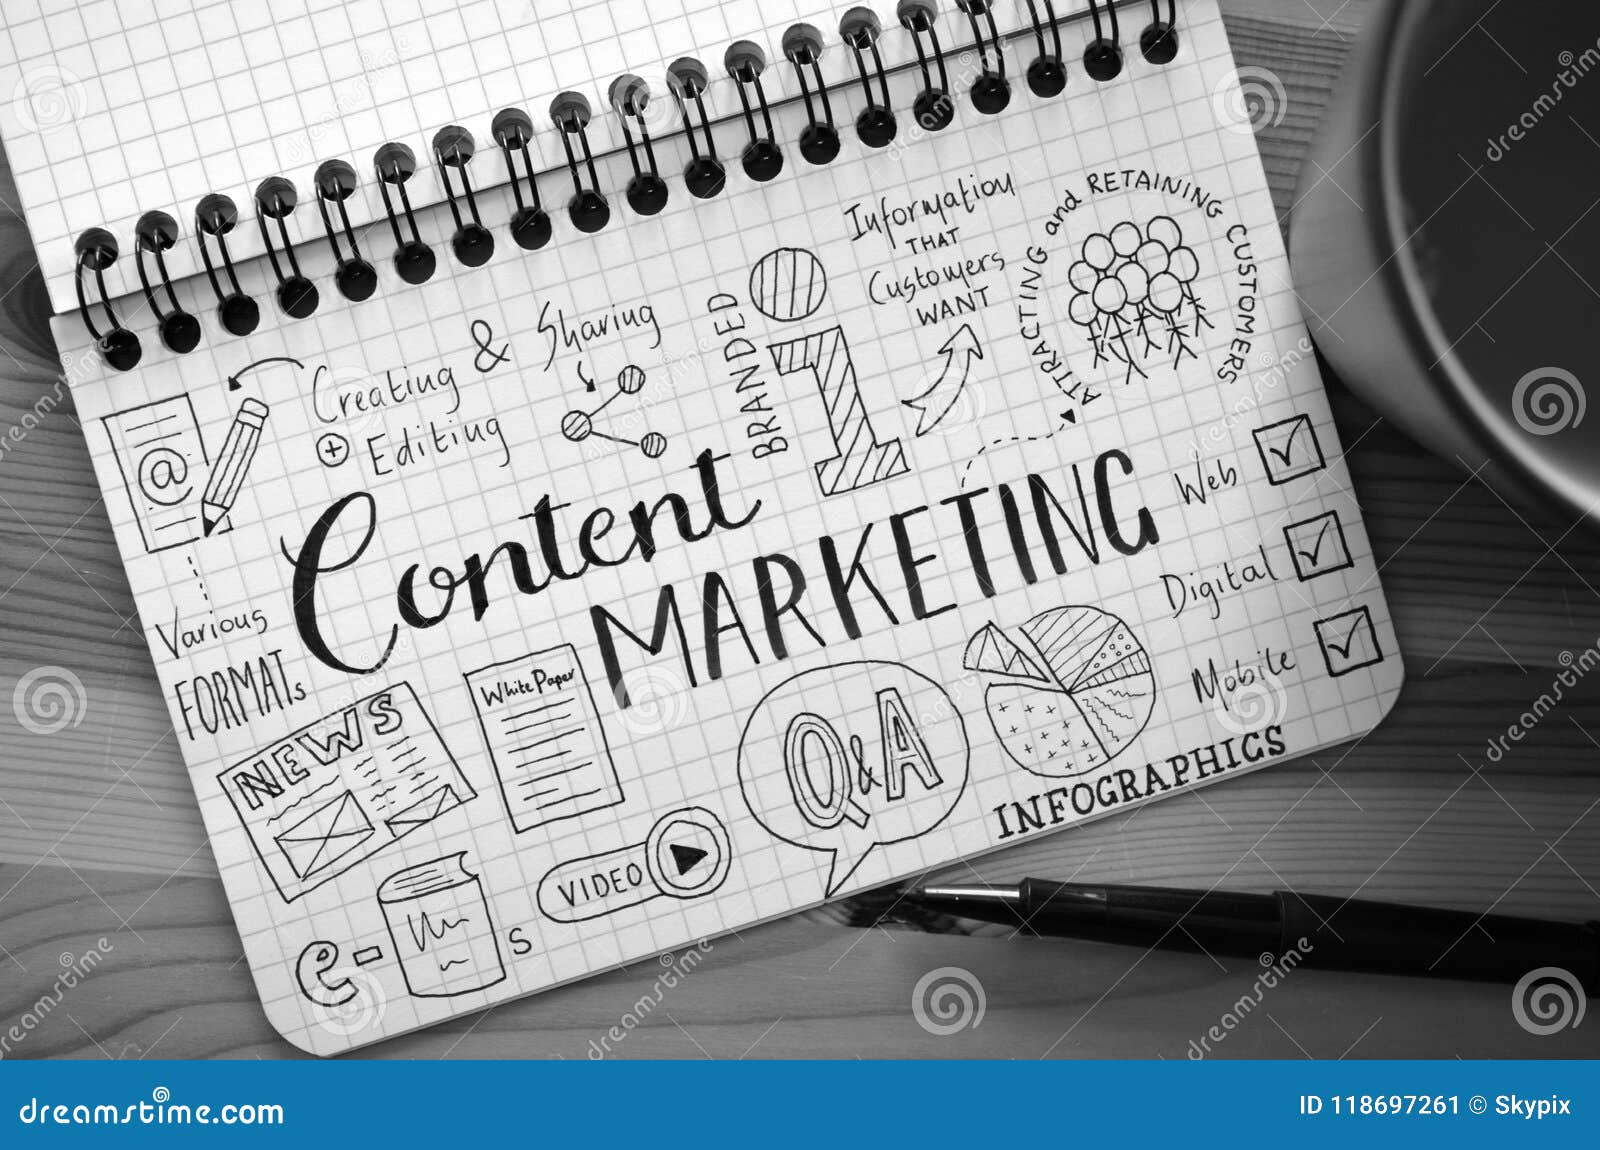 content marketing hand-lettered sketch notes